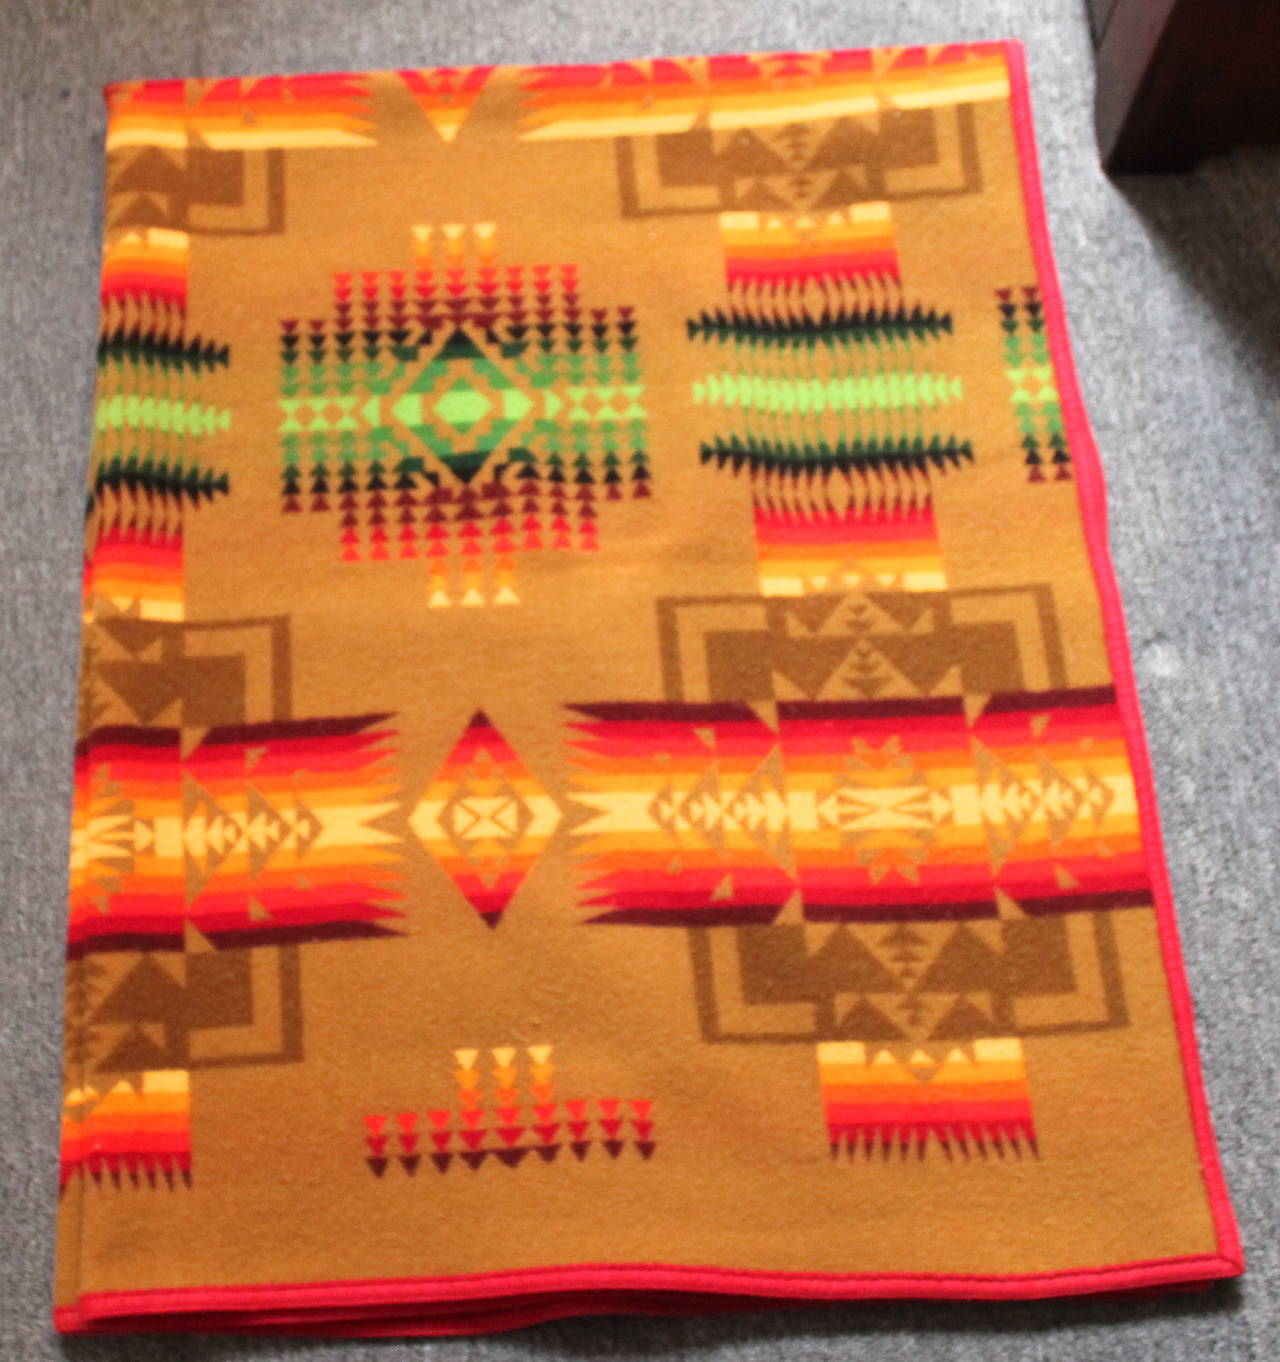 Amazing Pendleton wool Indian camp blanket with great color and pattern. The condition is very good. Great geometric pattern.